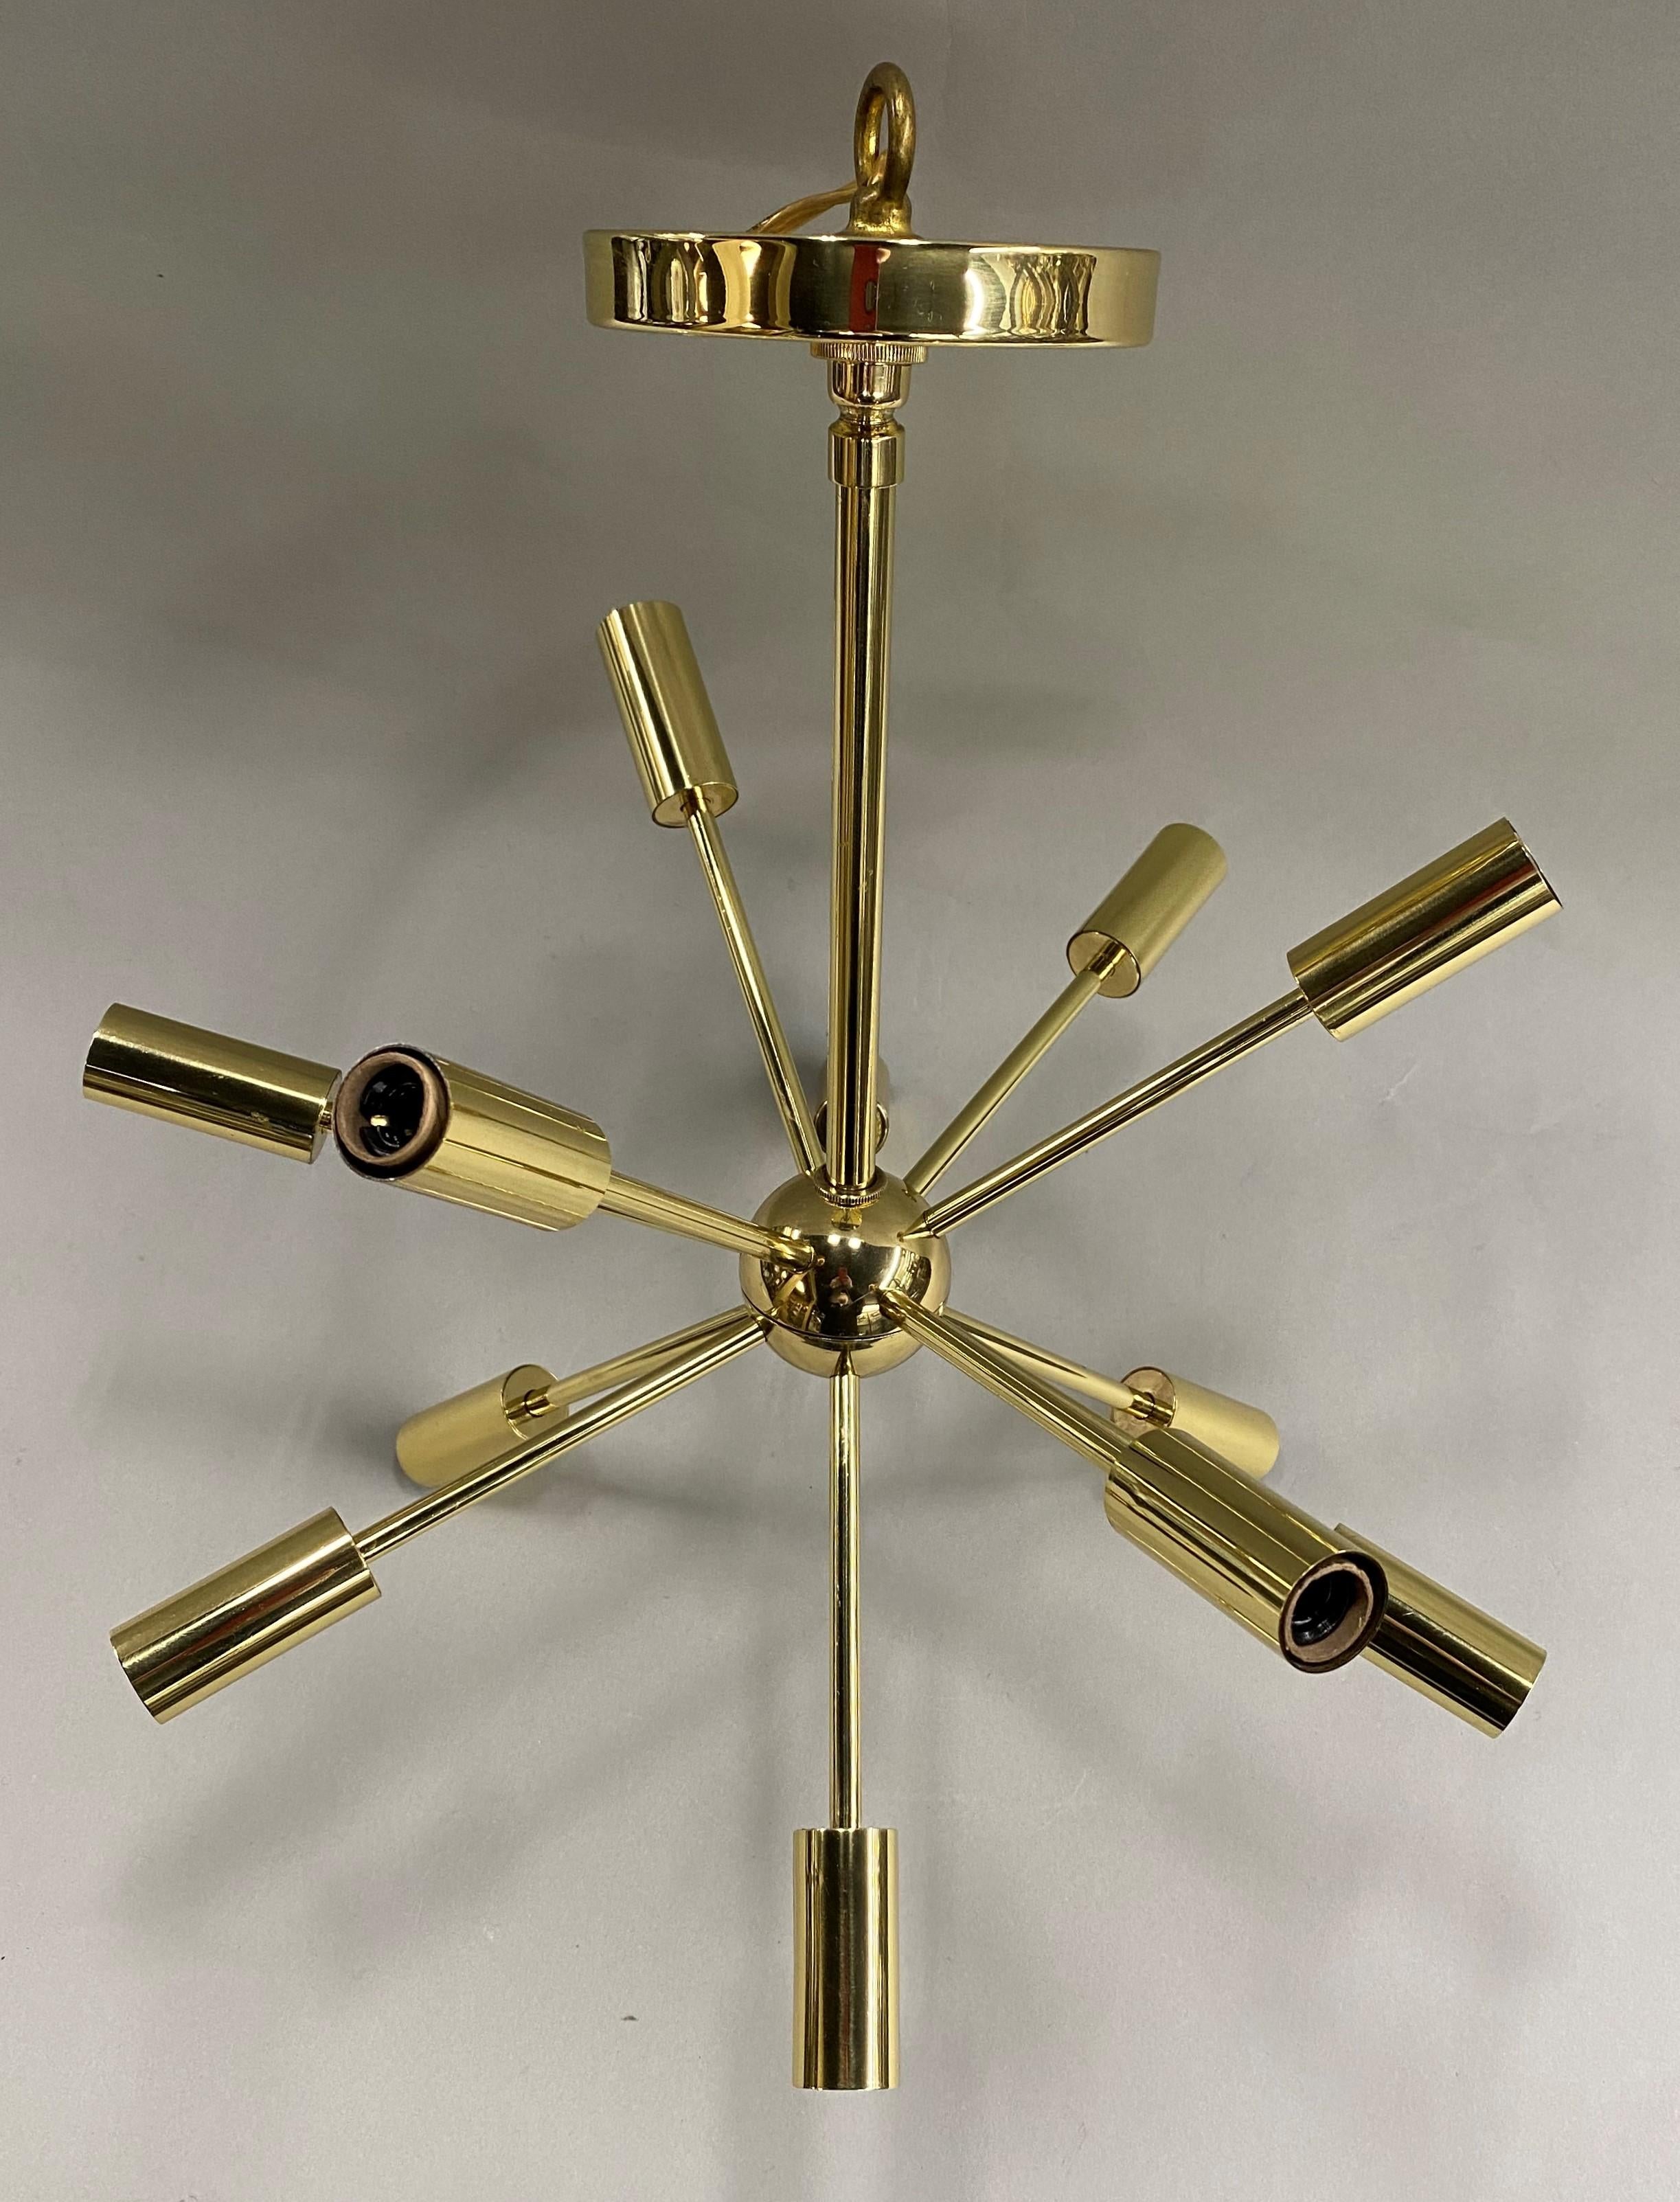 A fine mid-century space age design petite Sputnick 12-light brass chandelier with canopy. The first satellite that ever orbited the earth was the Soviet Union's Sputnik satellite, launched in 1957. Soon thereafter the launch inspired the creation